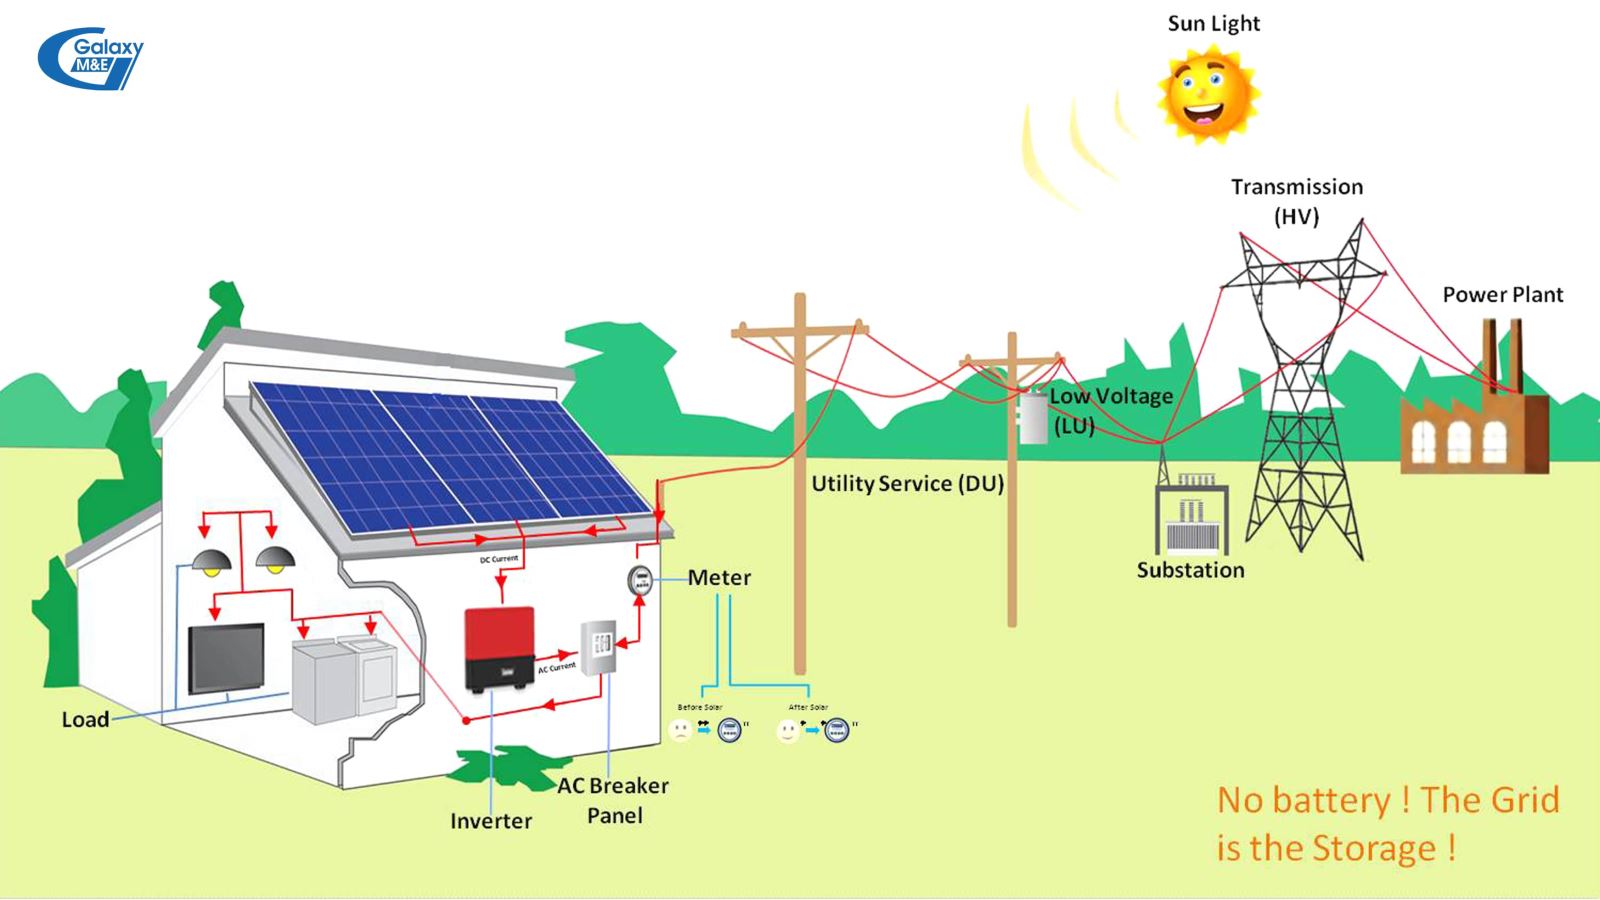 Solar power system directly connected to the grid.